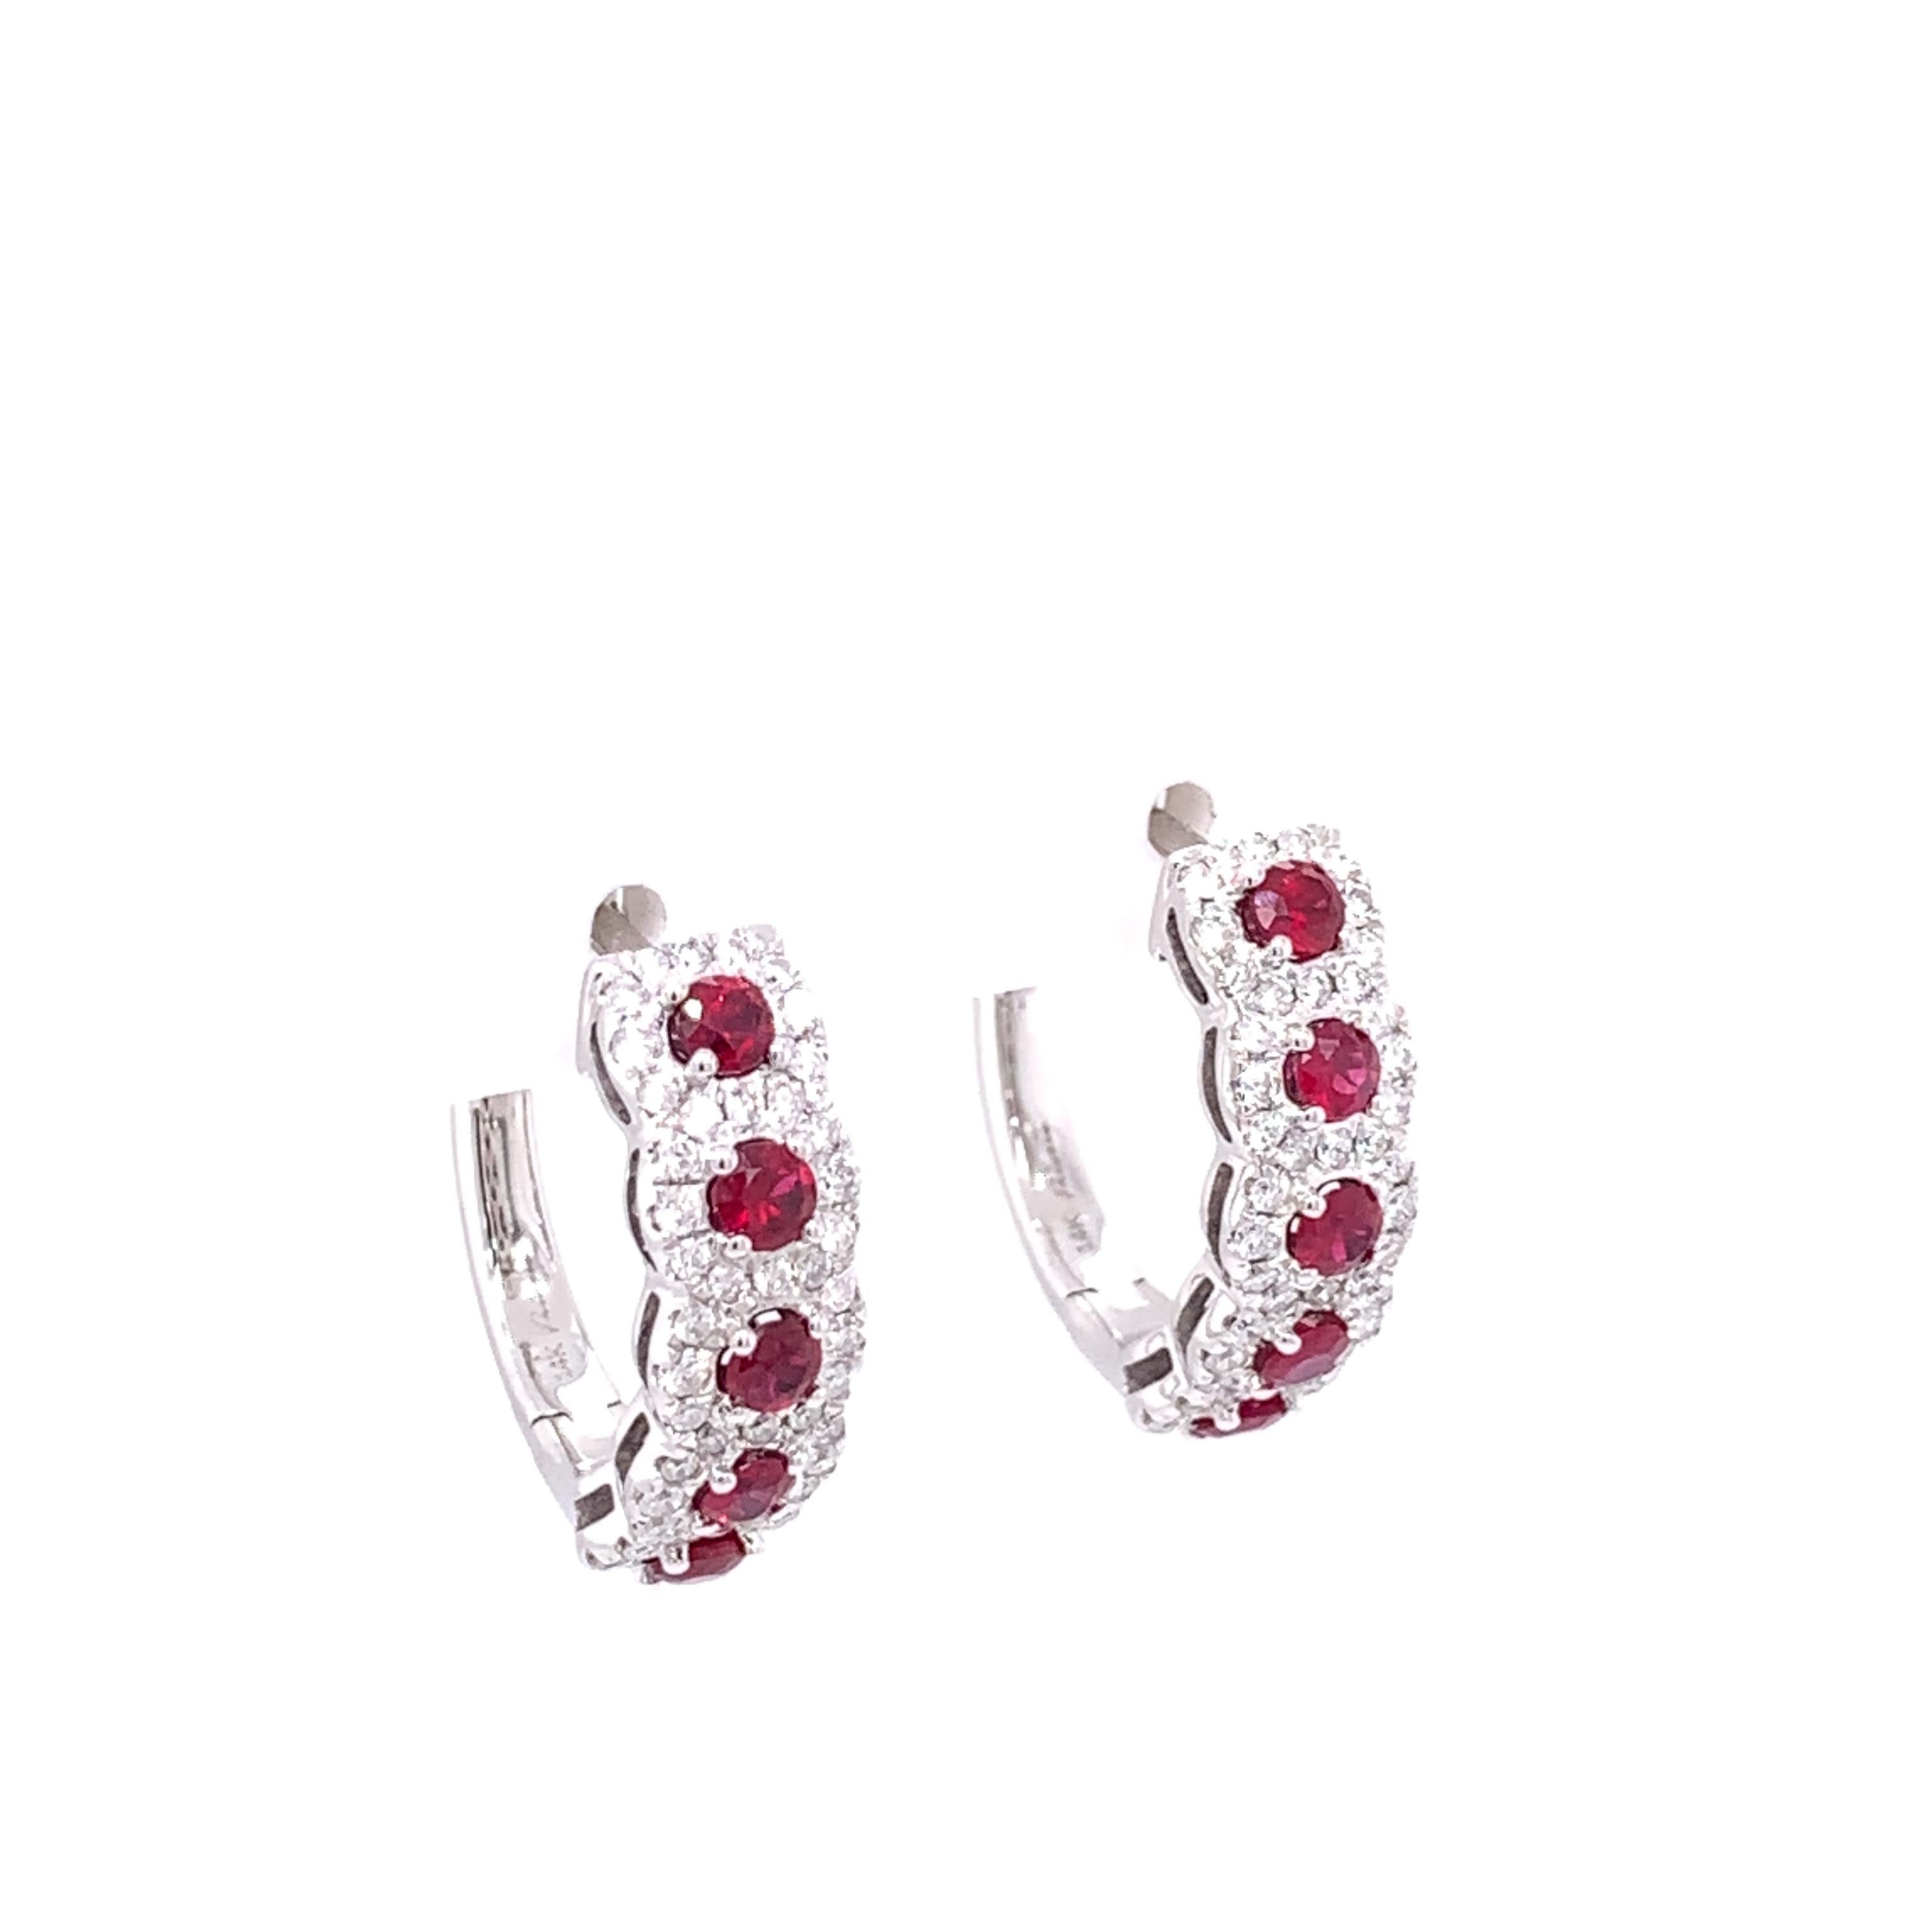 A gorgeous pair of ruby and diamond halo hoop earrings approximately 18mm which is the perfect size for everyday wear. These earrings feature 10 round ruby stones crafted in 14 karat white gold surrounded by a total of 96 round brilliant diamonds in